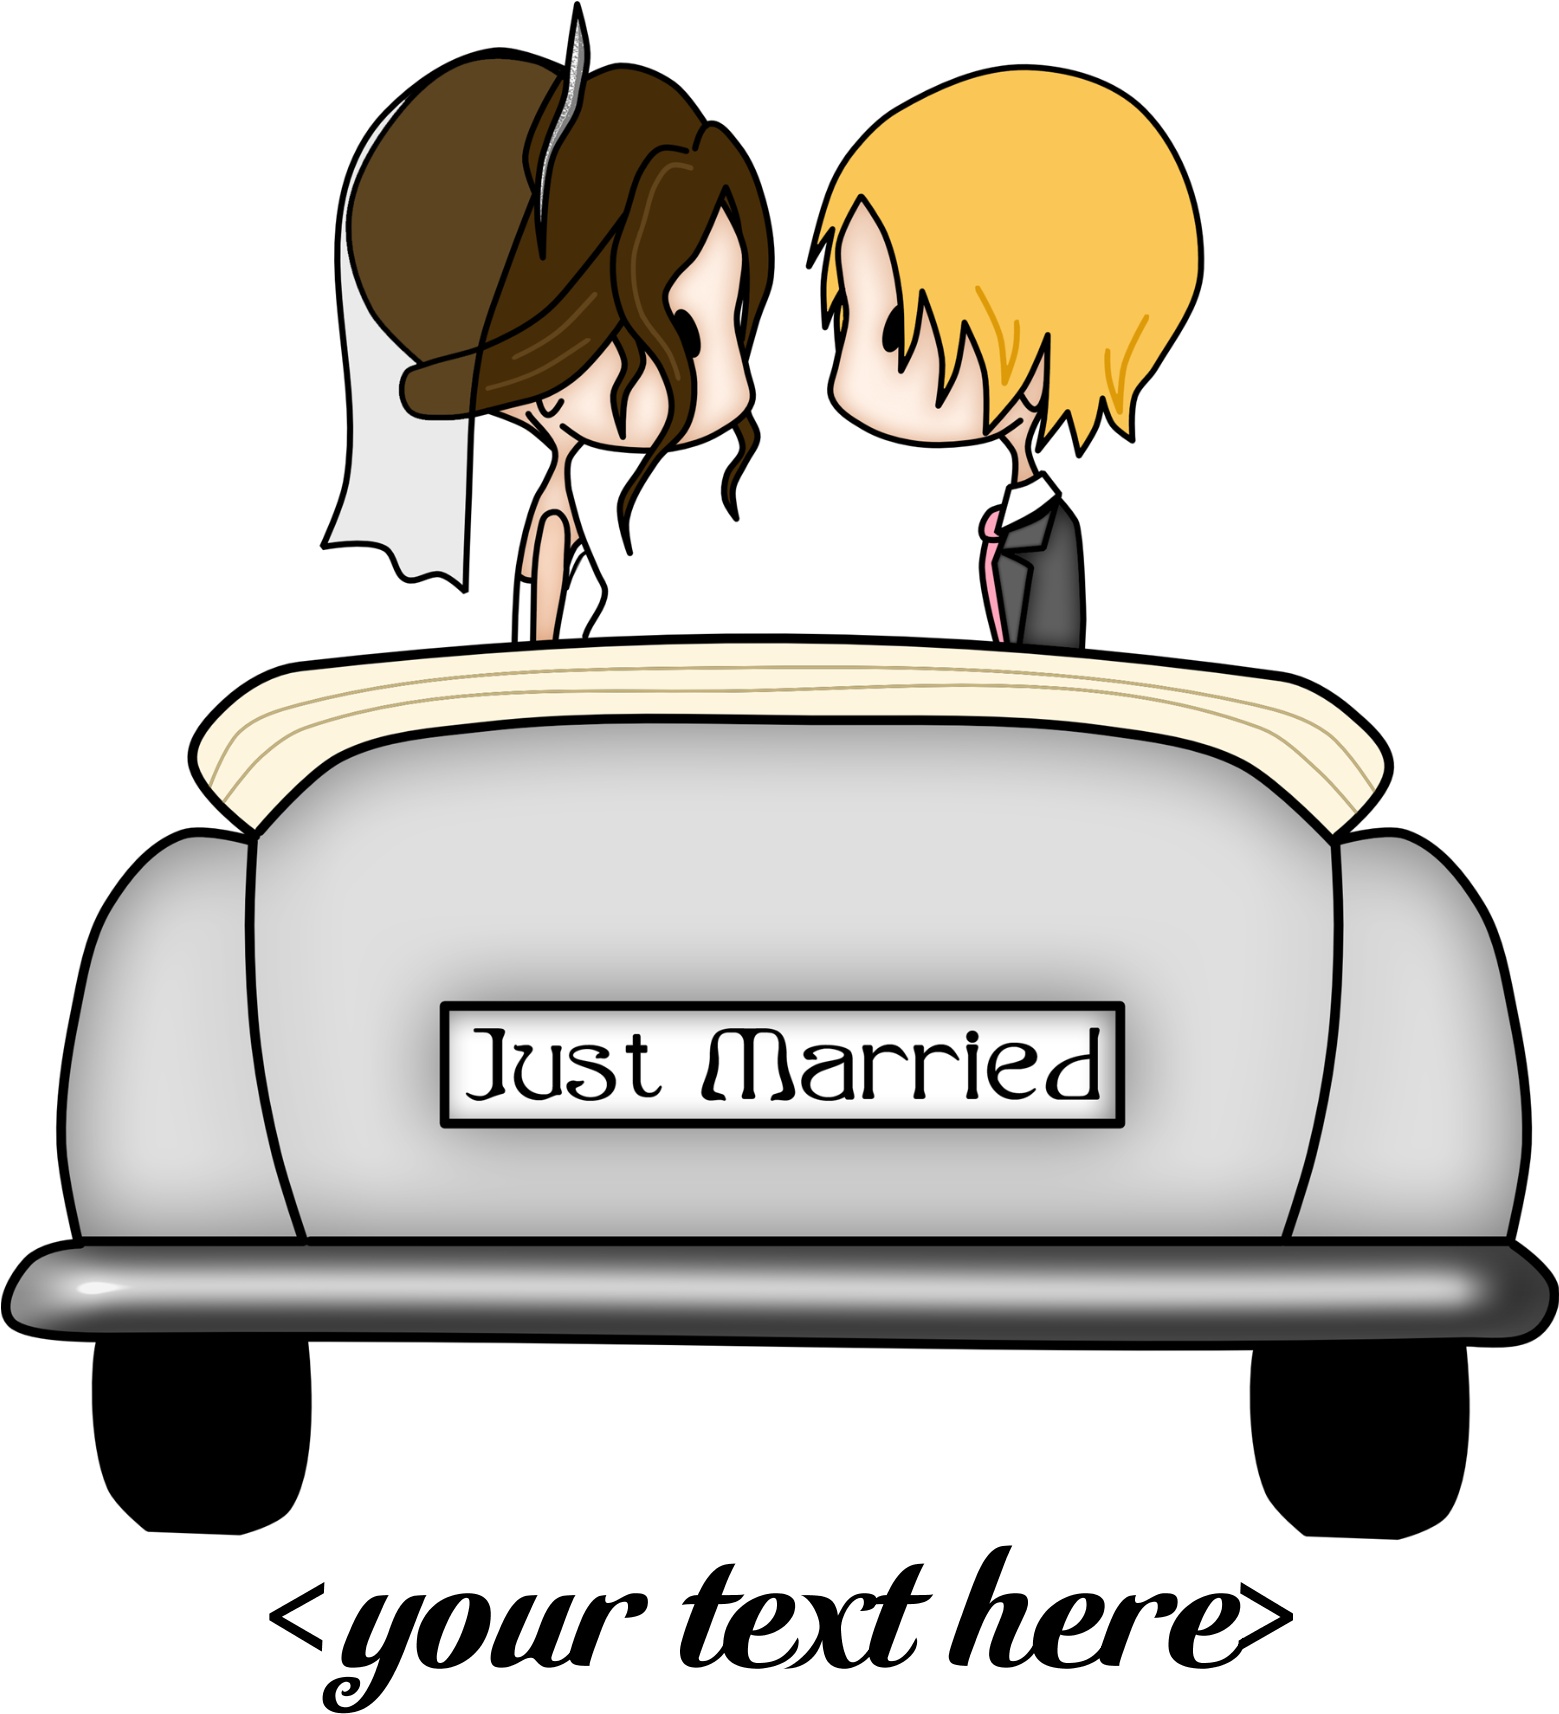 Just Married Cartoon Couple Car Illustration PNG